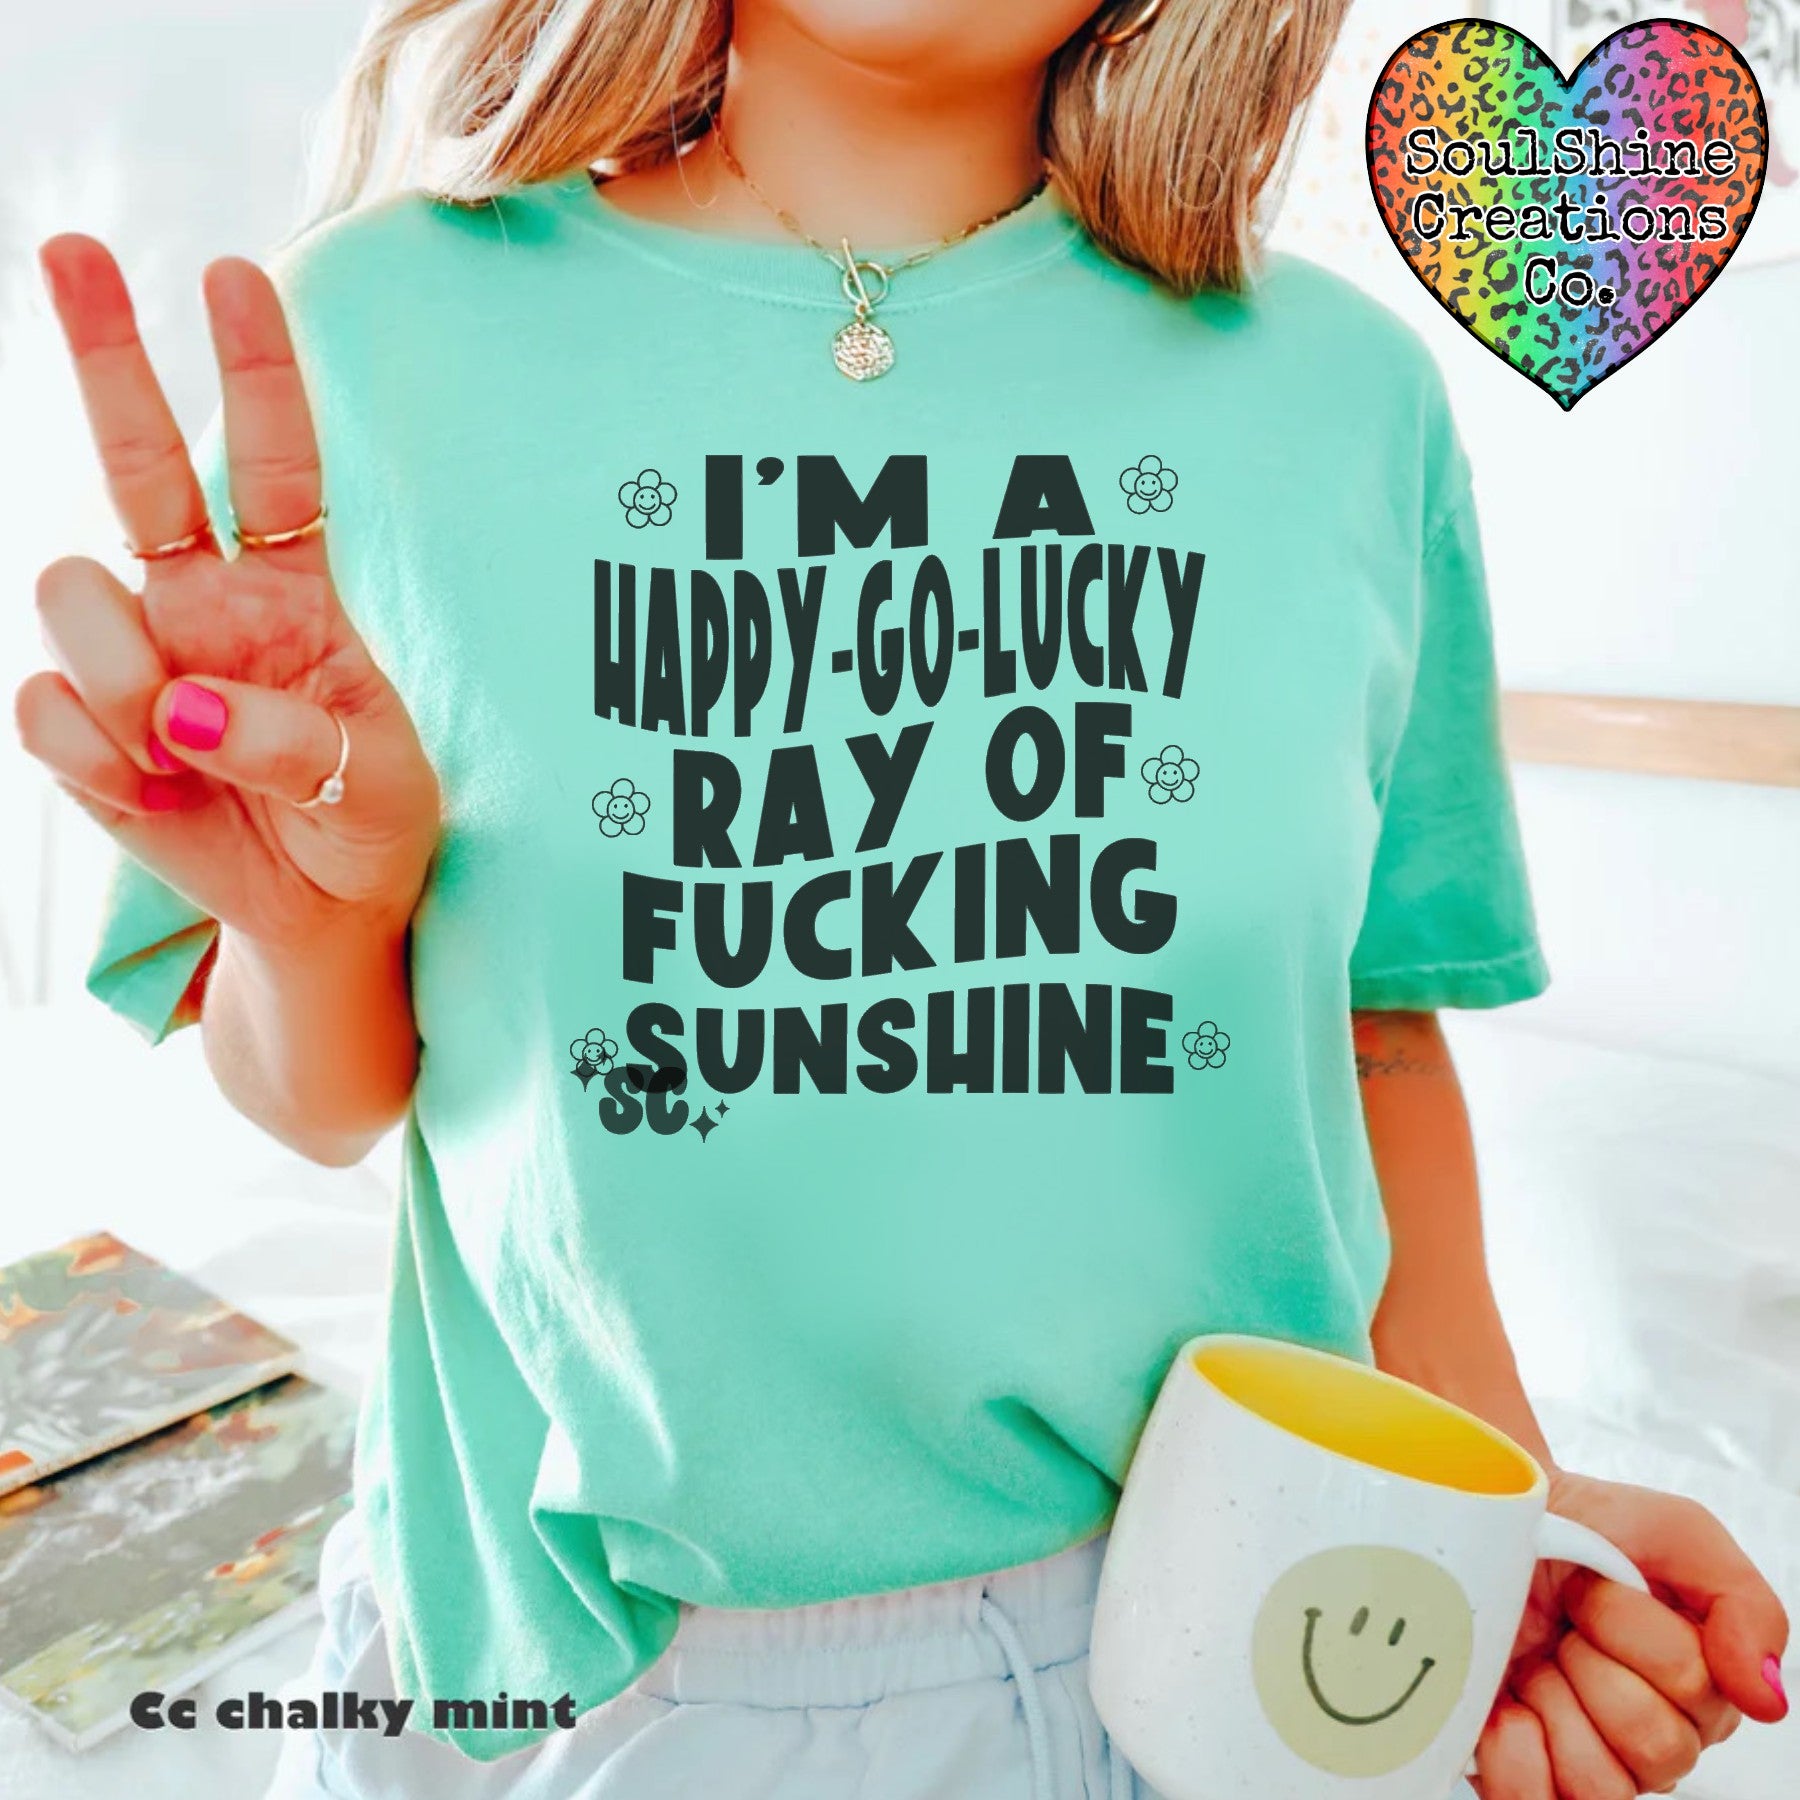 pille salat rødme I'm a Happy Go Lucky Ray of Fucking Sunshine Comfort Colors Shirt –  Soulshine Creations Co.